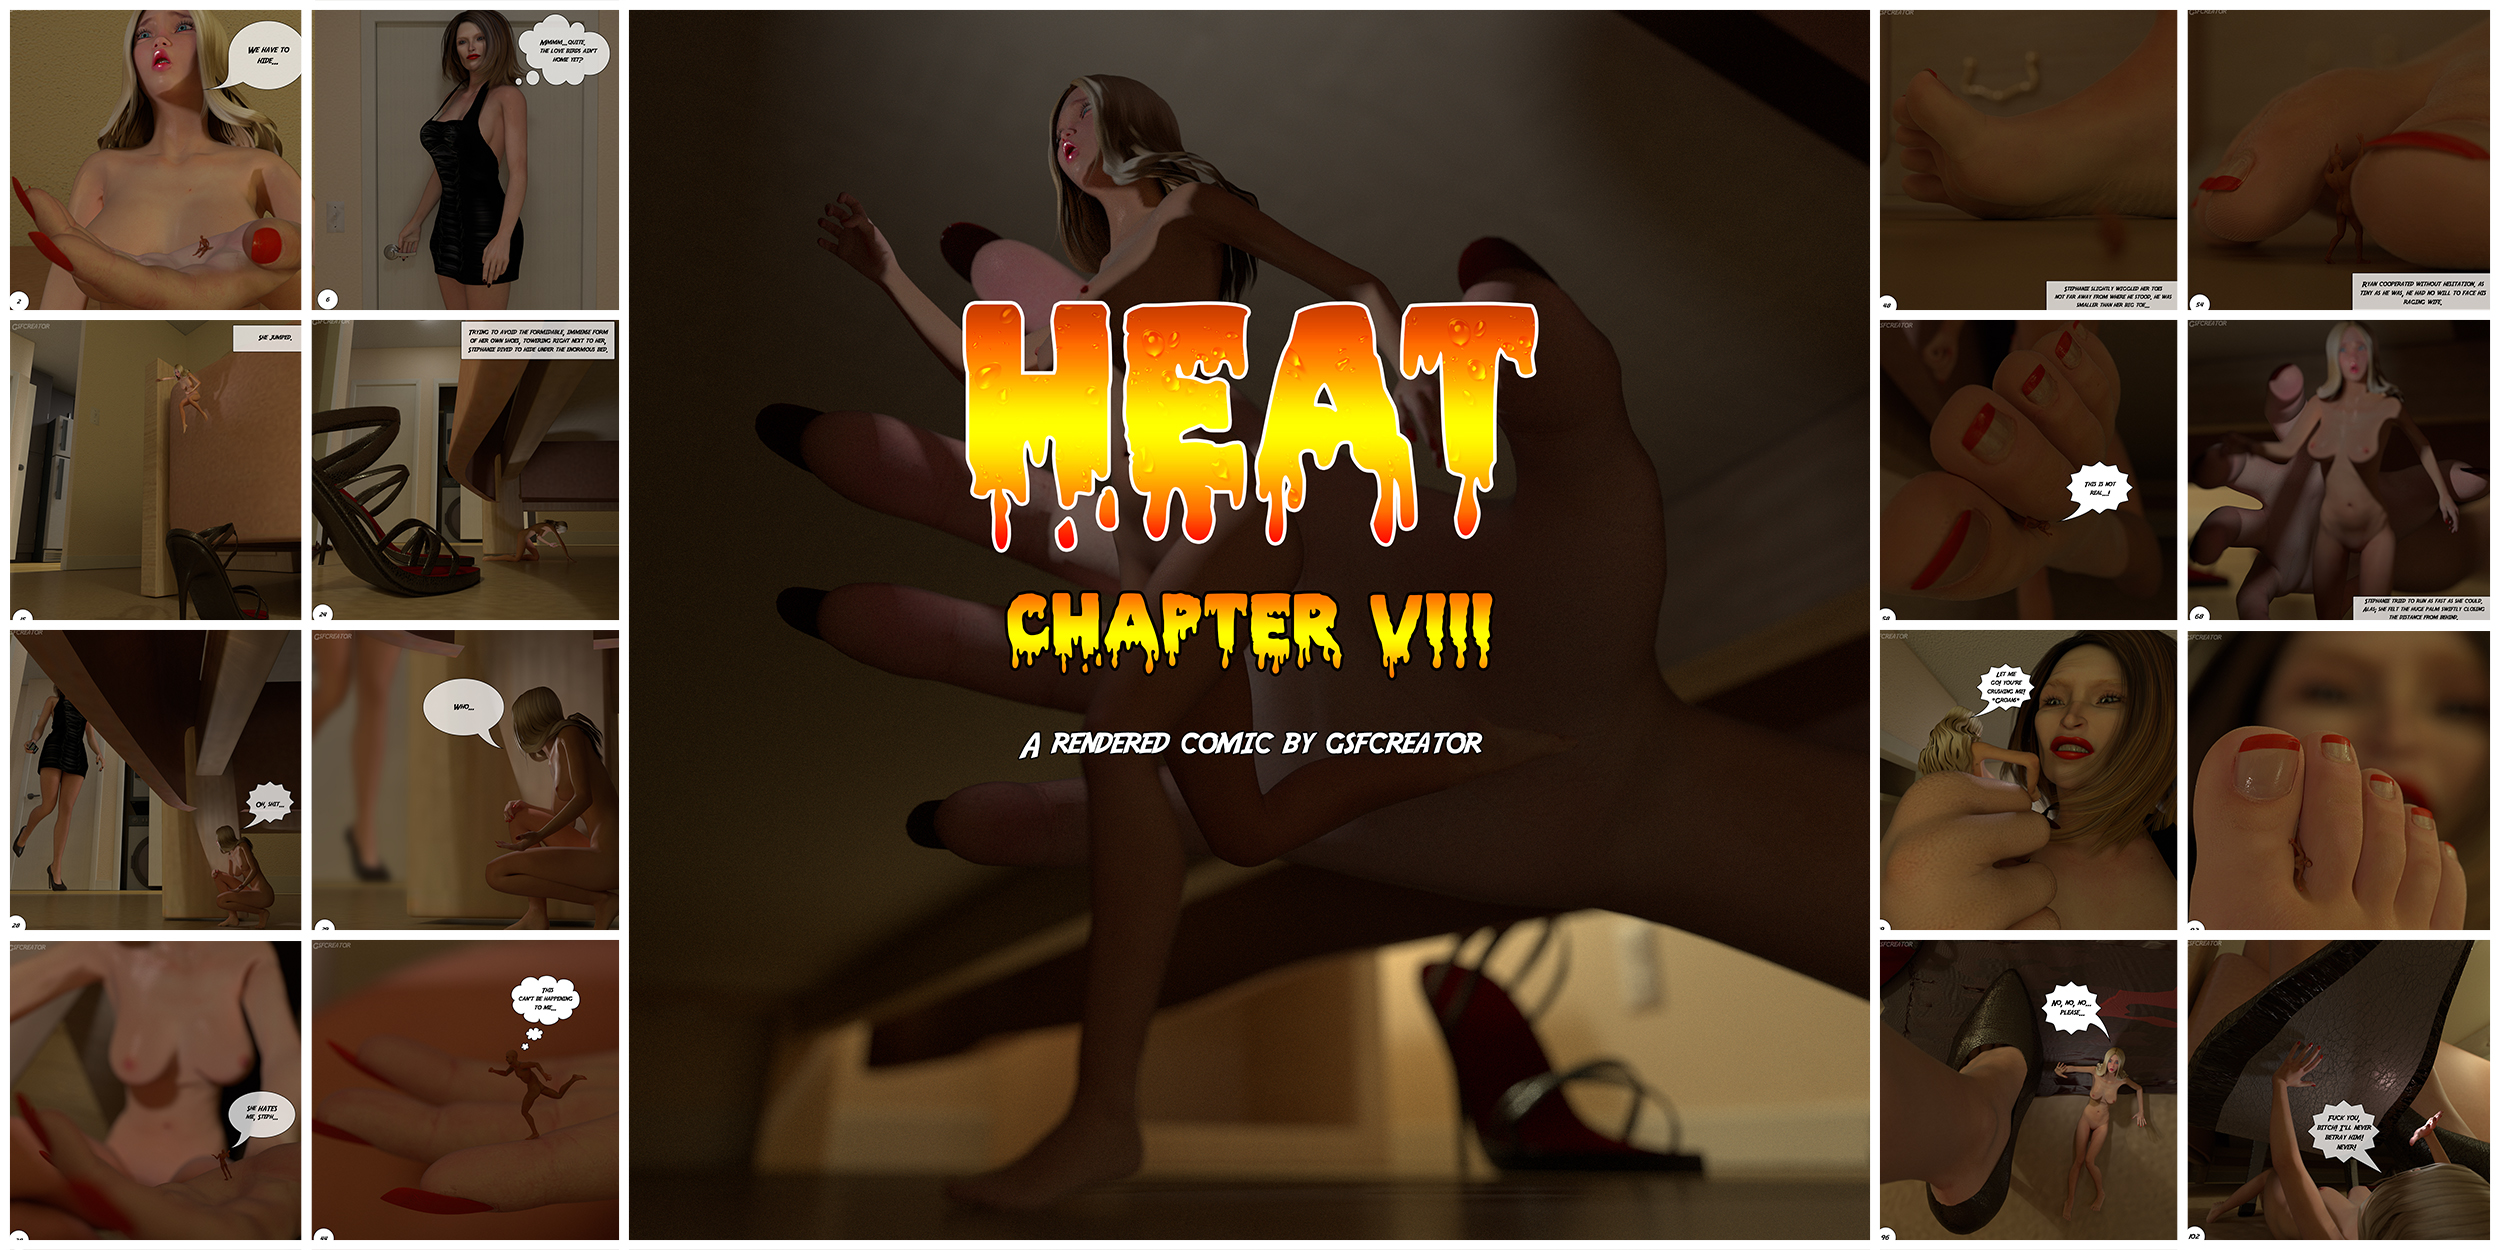 The awaited chapter VIII is finally here.
<br><br>
An unexpected intruder bust into Stephanie's house at the worst moment possible. As shrunken Stephanie and tiny Ryan hides, The intruder reveals herself. she is no other than Ryan's soon-to-be Ex-wife, Olivia.
<br><br>
Things are about to get really hectic.
<br><br>
Sm, SW, size comparisons, foot-fetish, and more!